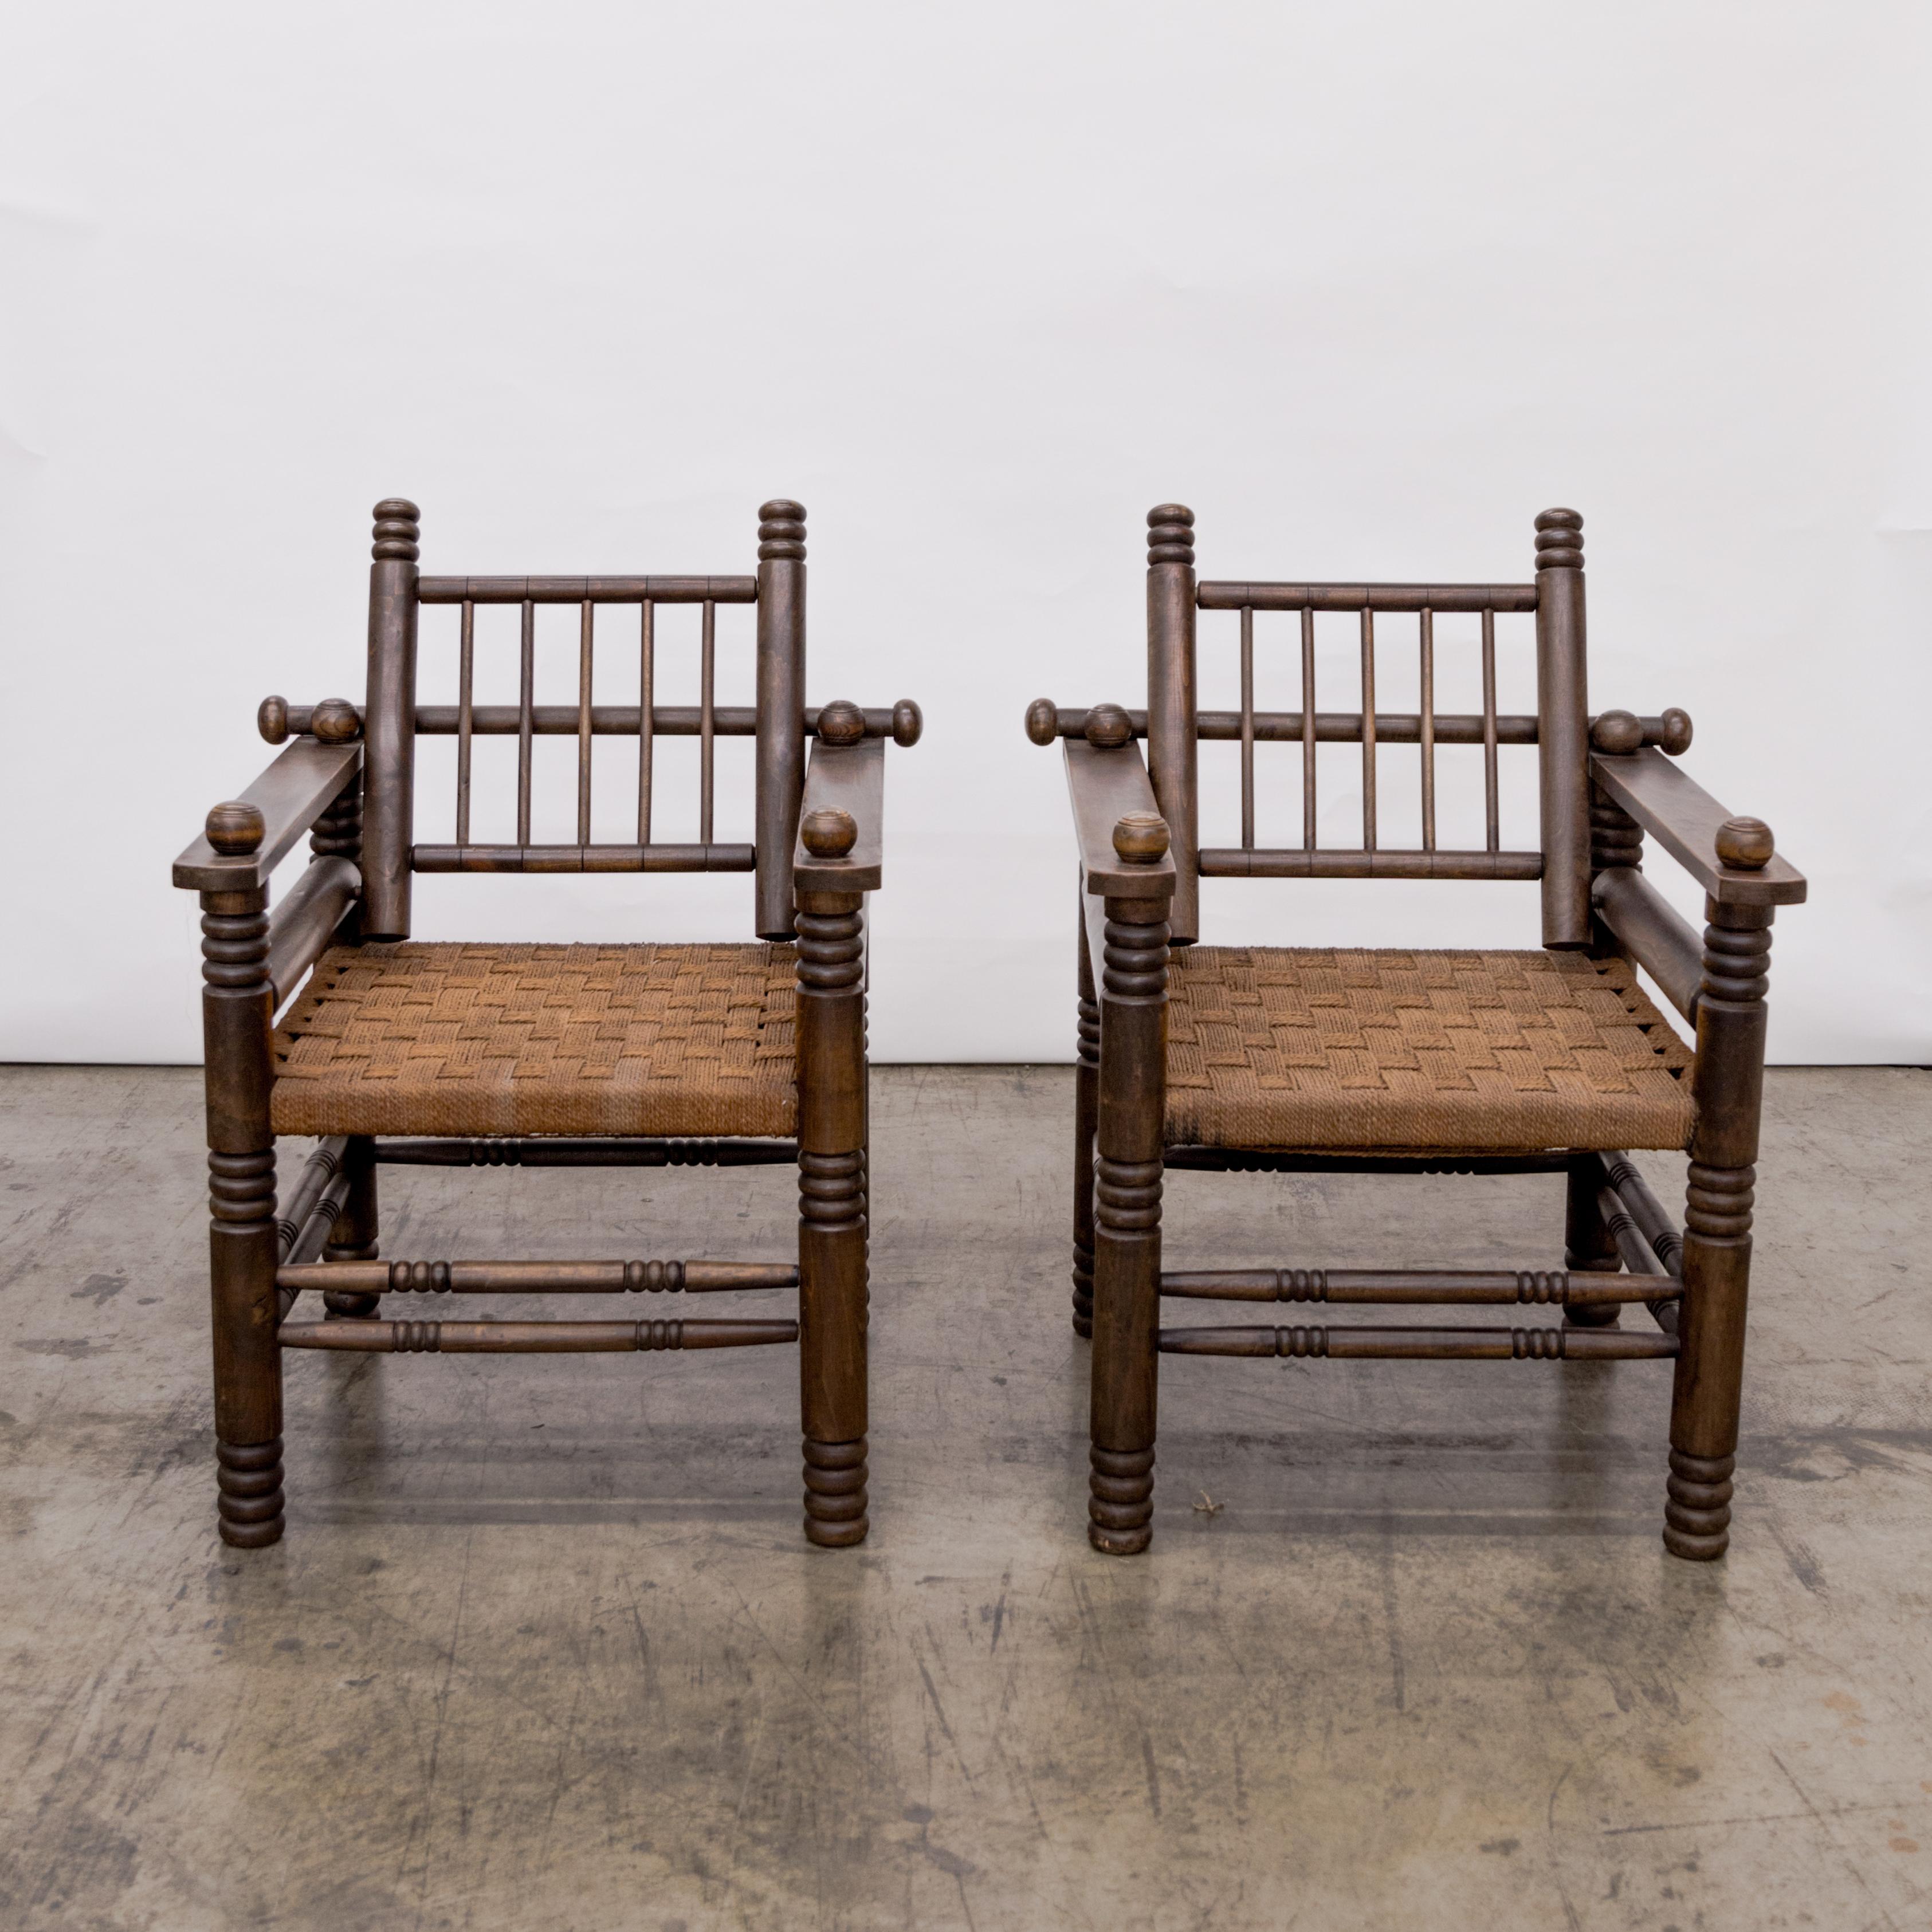 Pair of woven rush seat armchairs with turned walnut legs and rails by Charles Dudouyt.